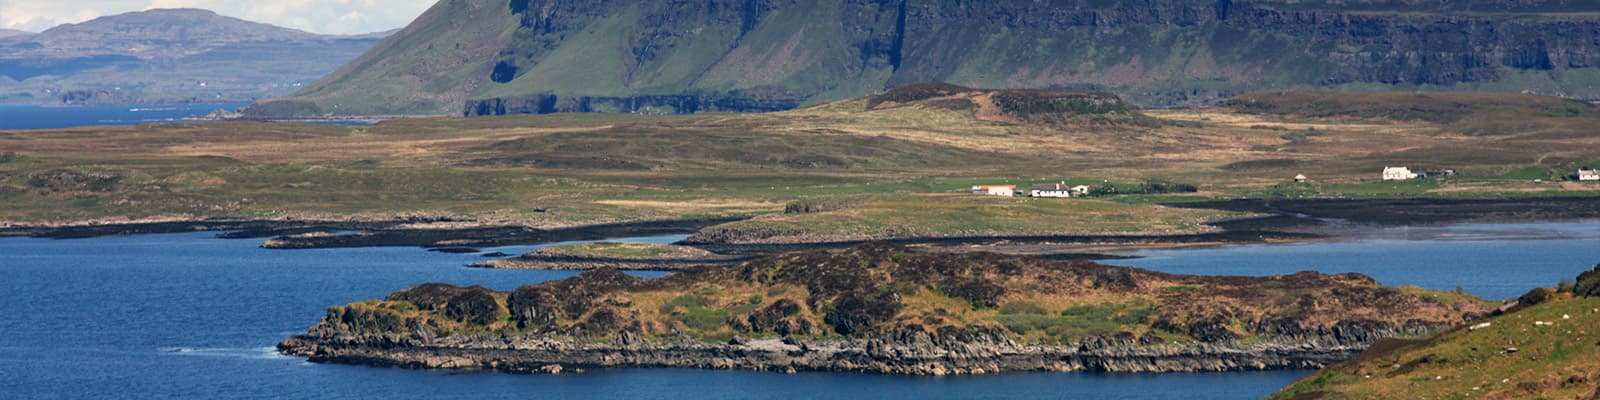 A landscape on the Isle of Mull